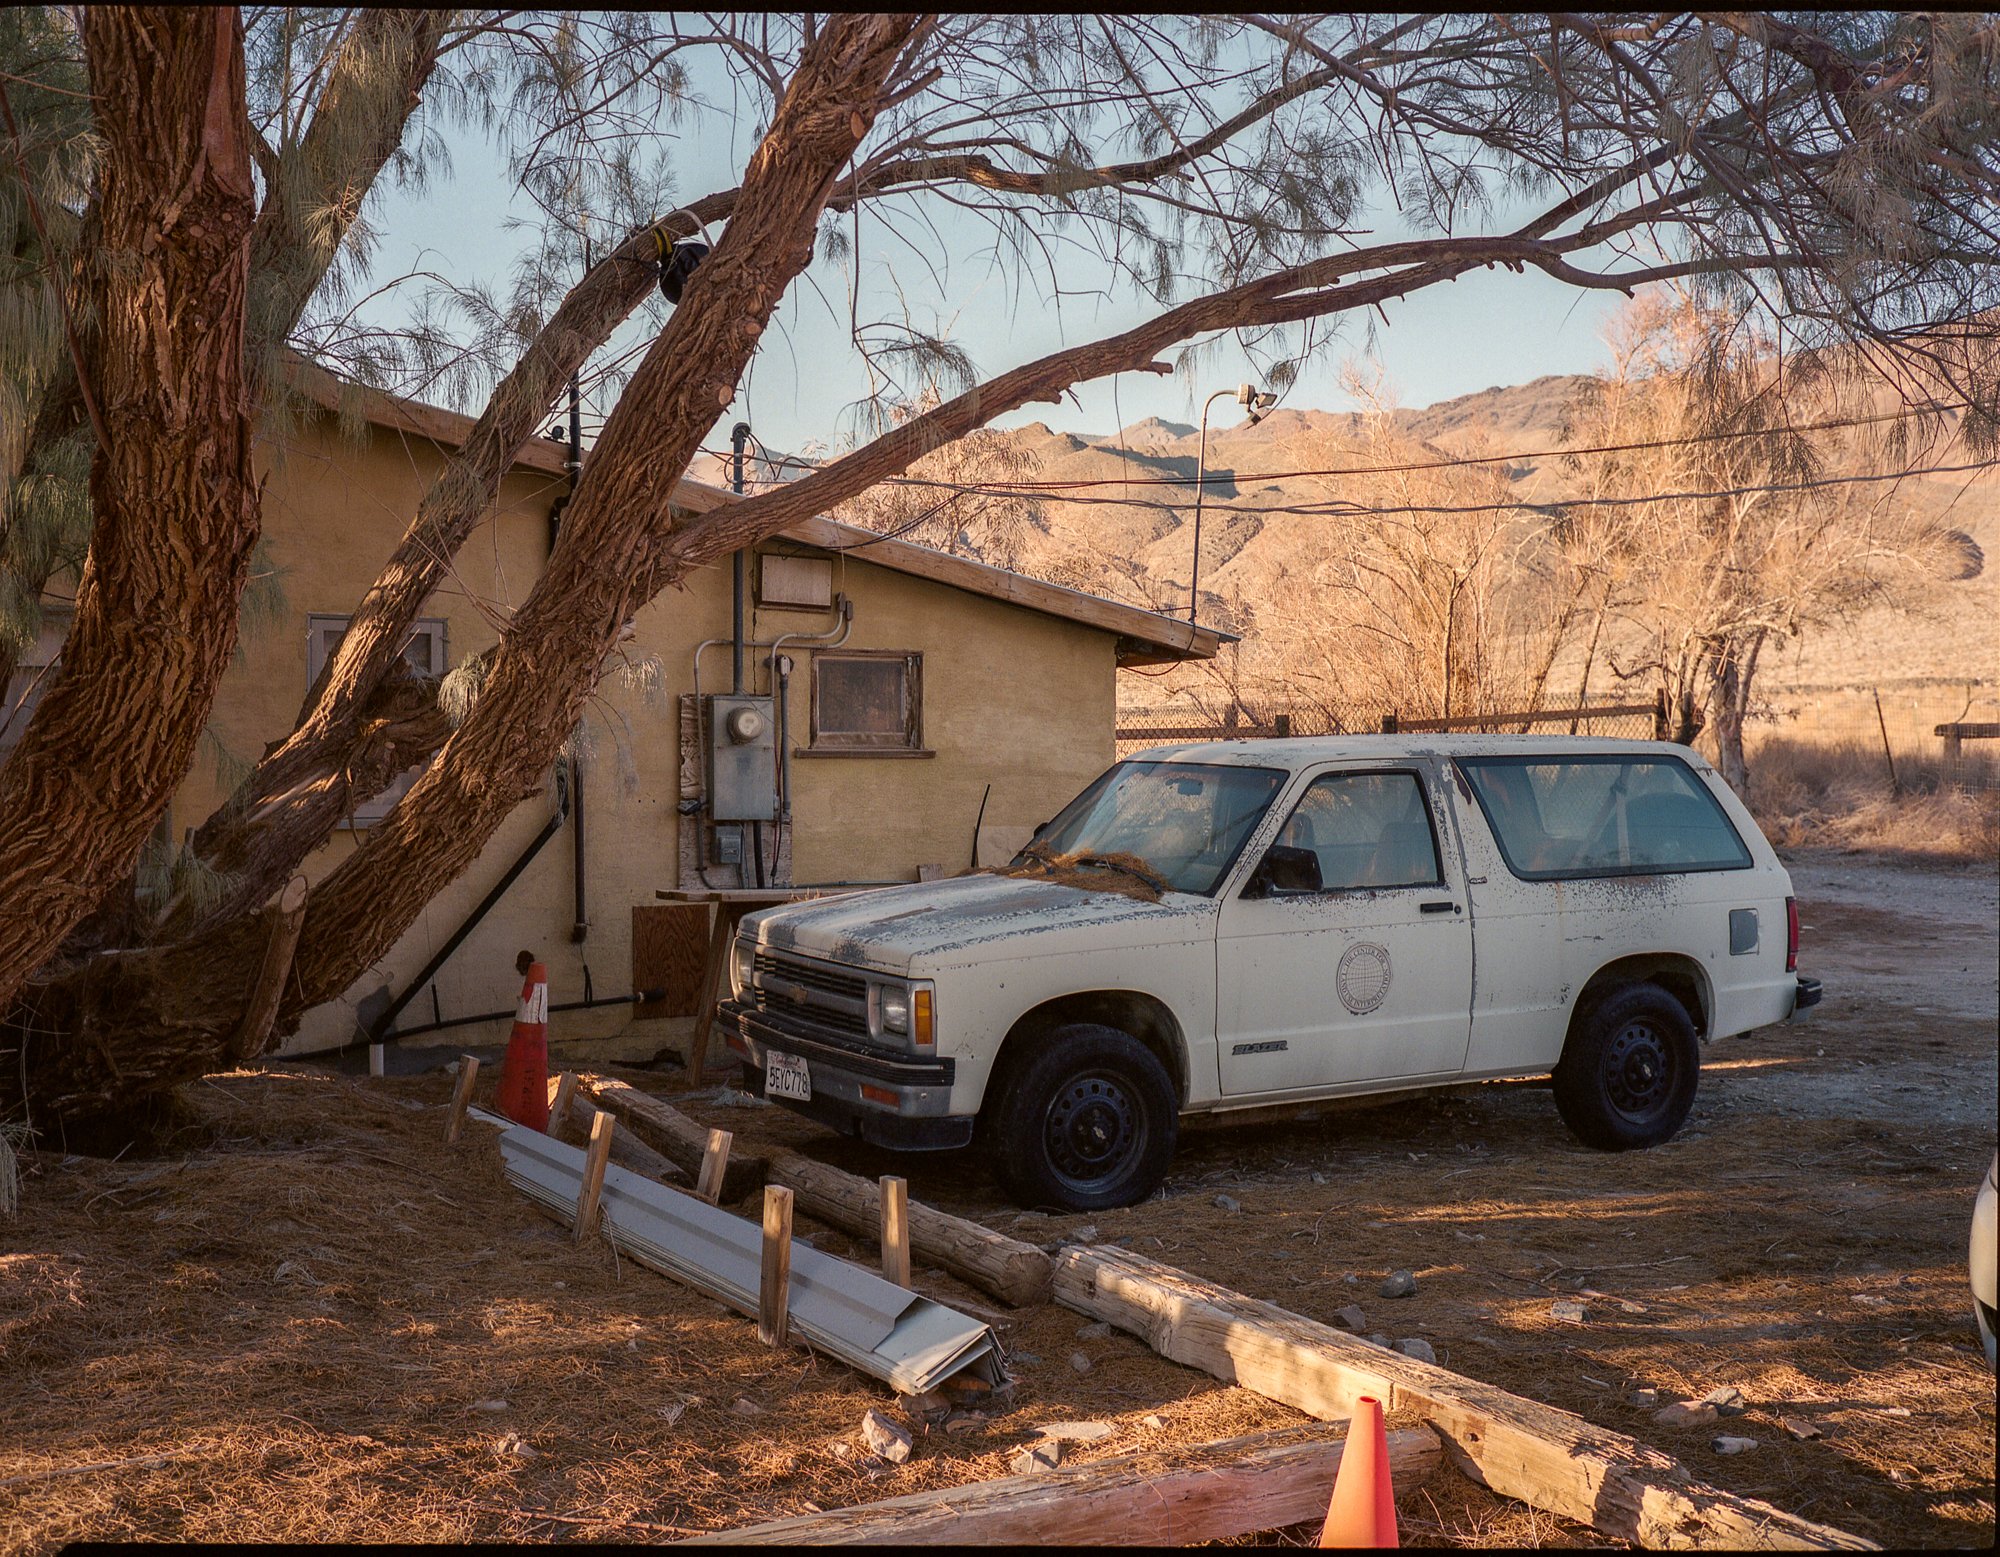  Matt’s old Chevy S10 Blazer. Didn’t know when I was taking this photo that it would soon be mine… 